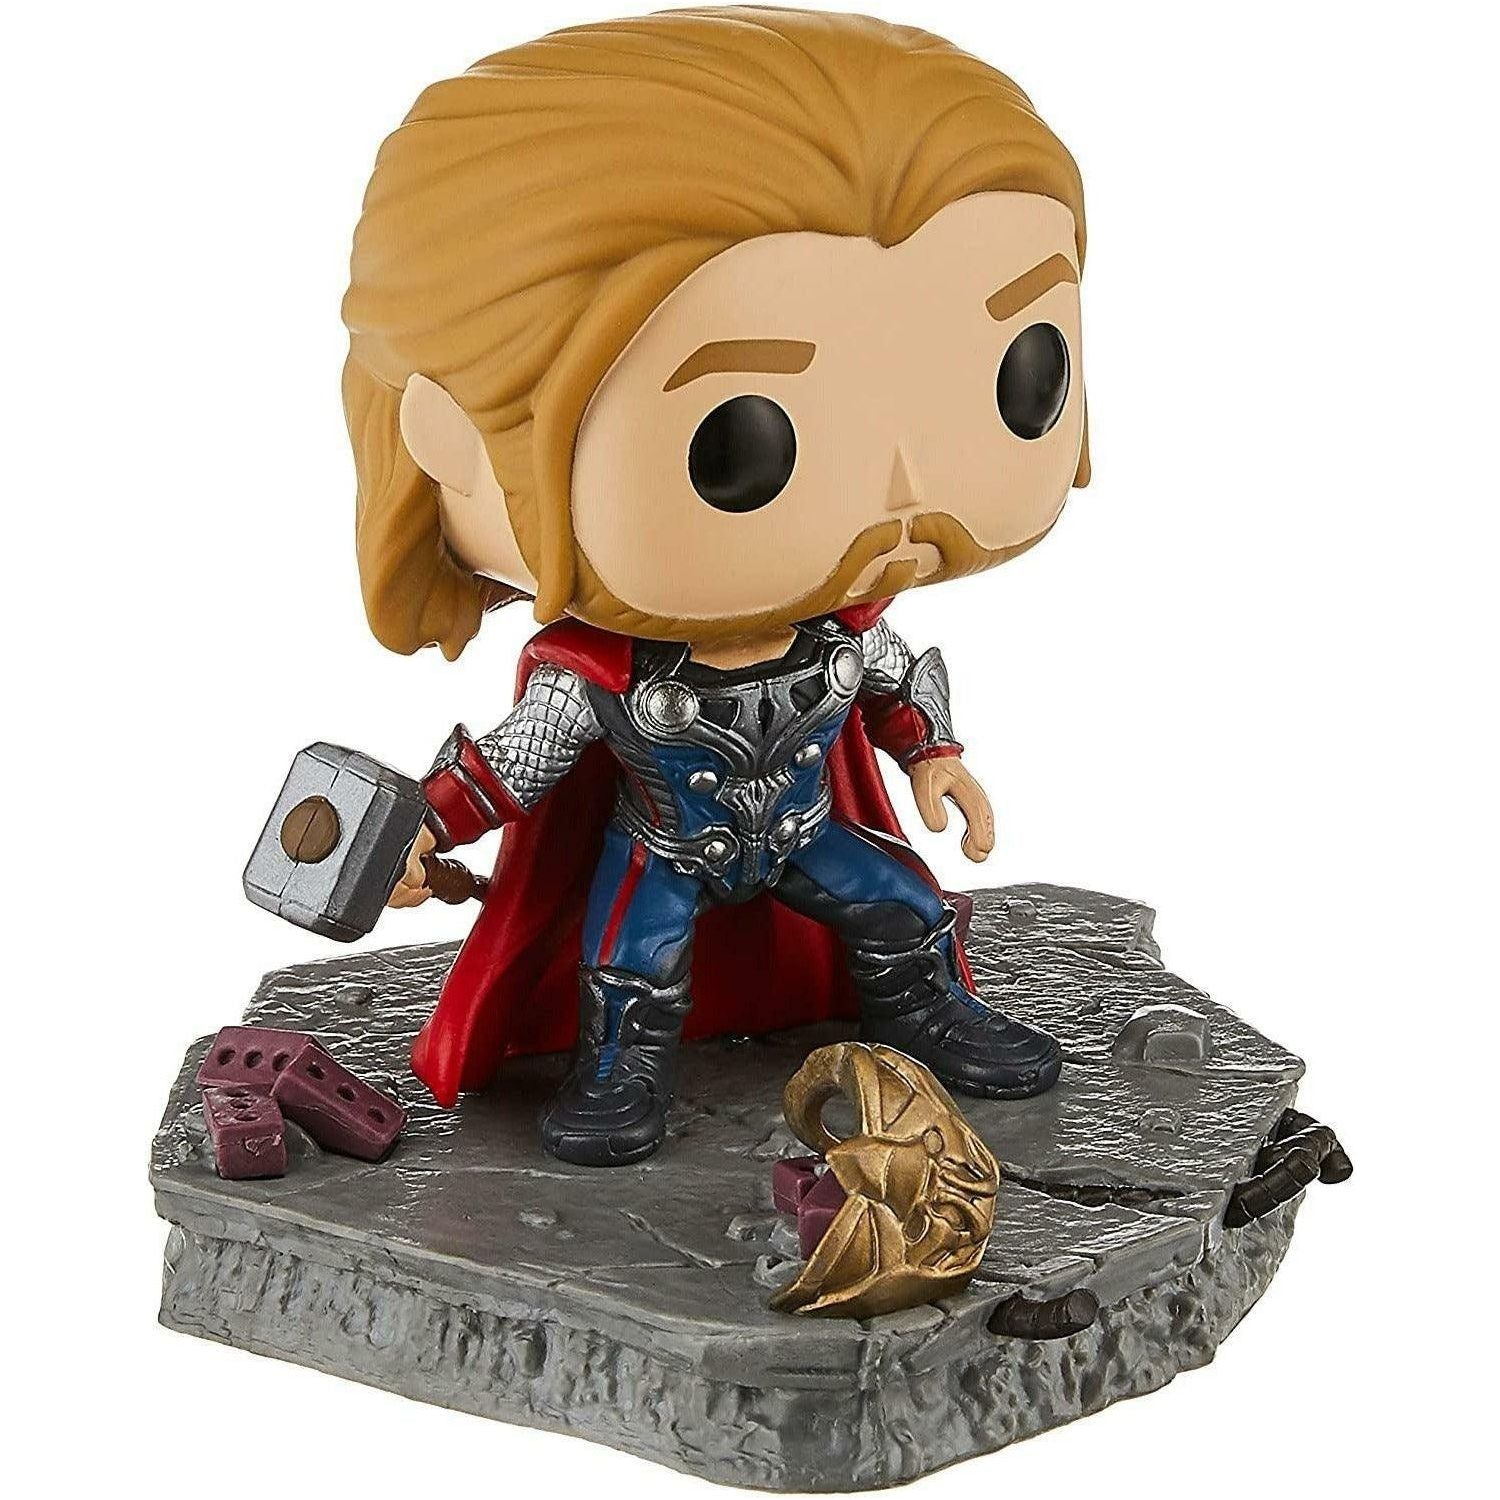 Funko Pop! Deluxe, Marvel: Avengers Assemble Series - Thor 12 inch - BumbleToys - 18+, 4+ Years, 5-7 Years, Action Figures, Avengers, Boys, Characters, Funko, Pre-Order, Thor